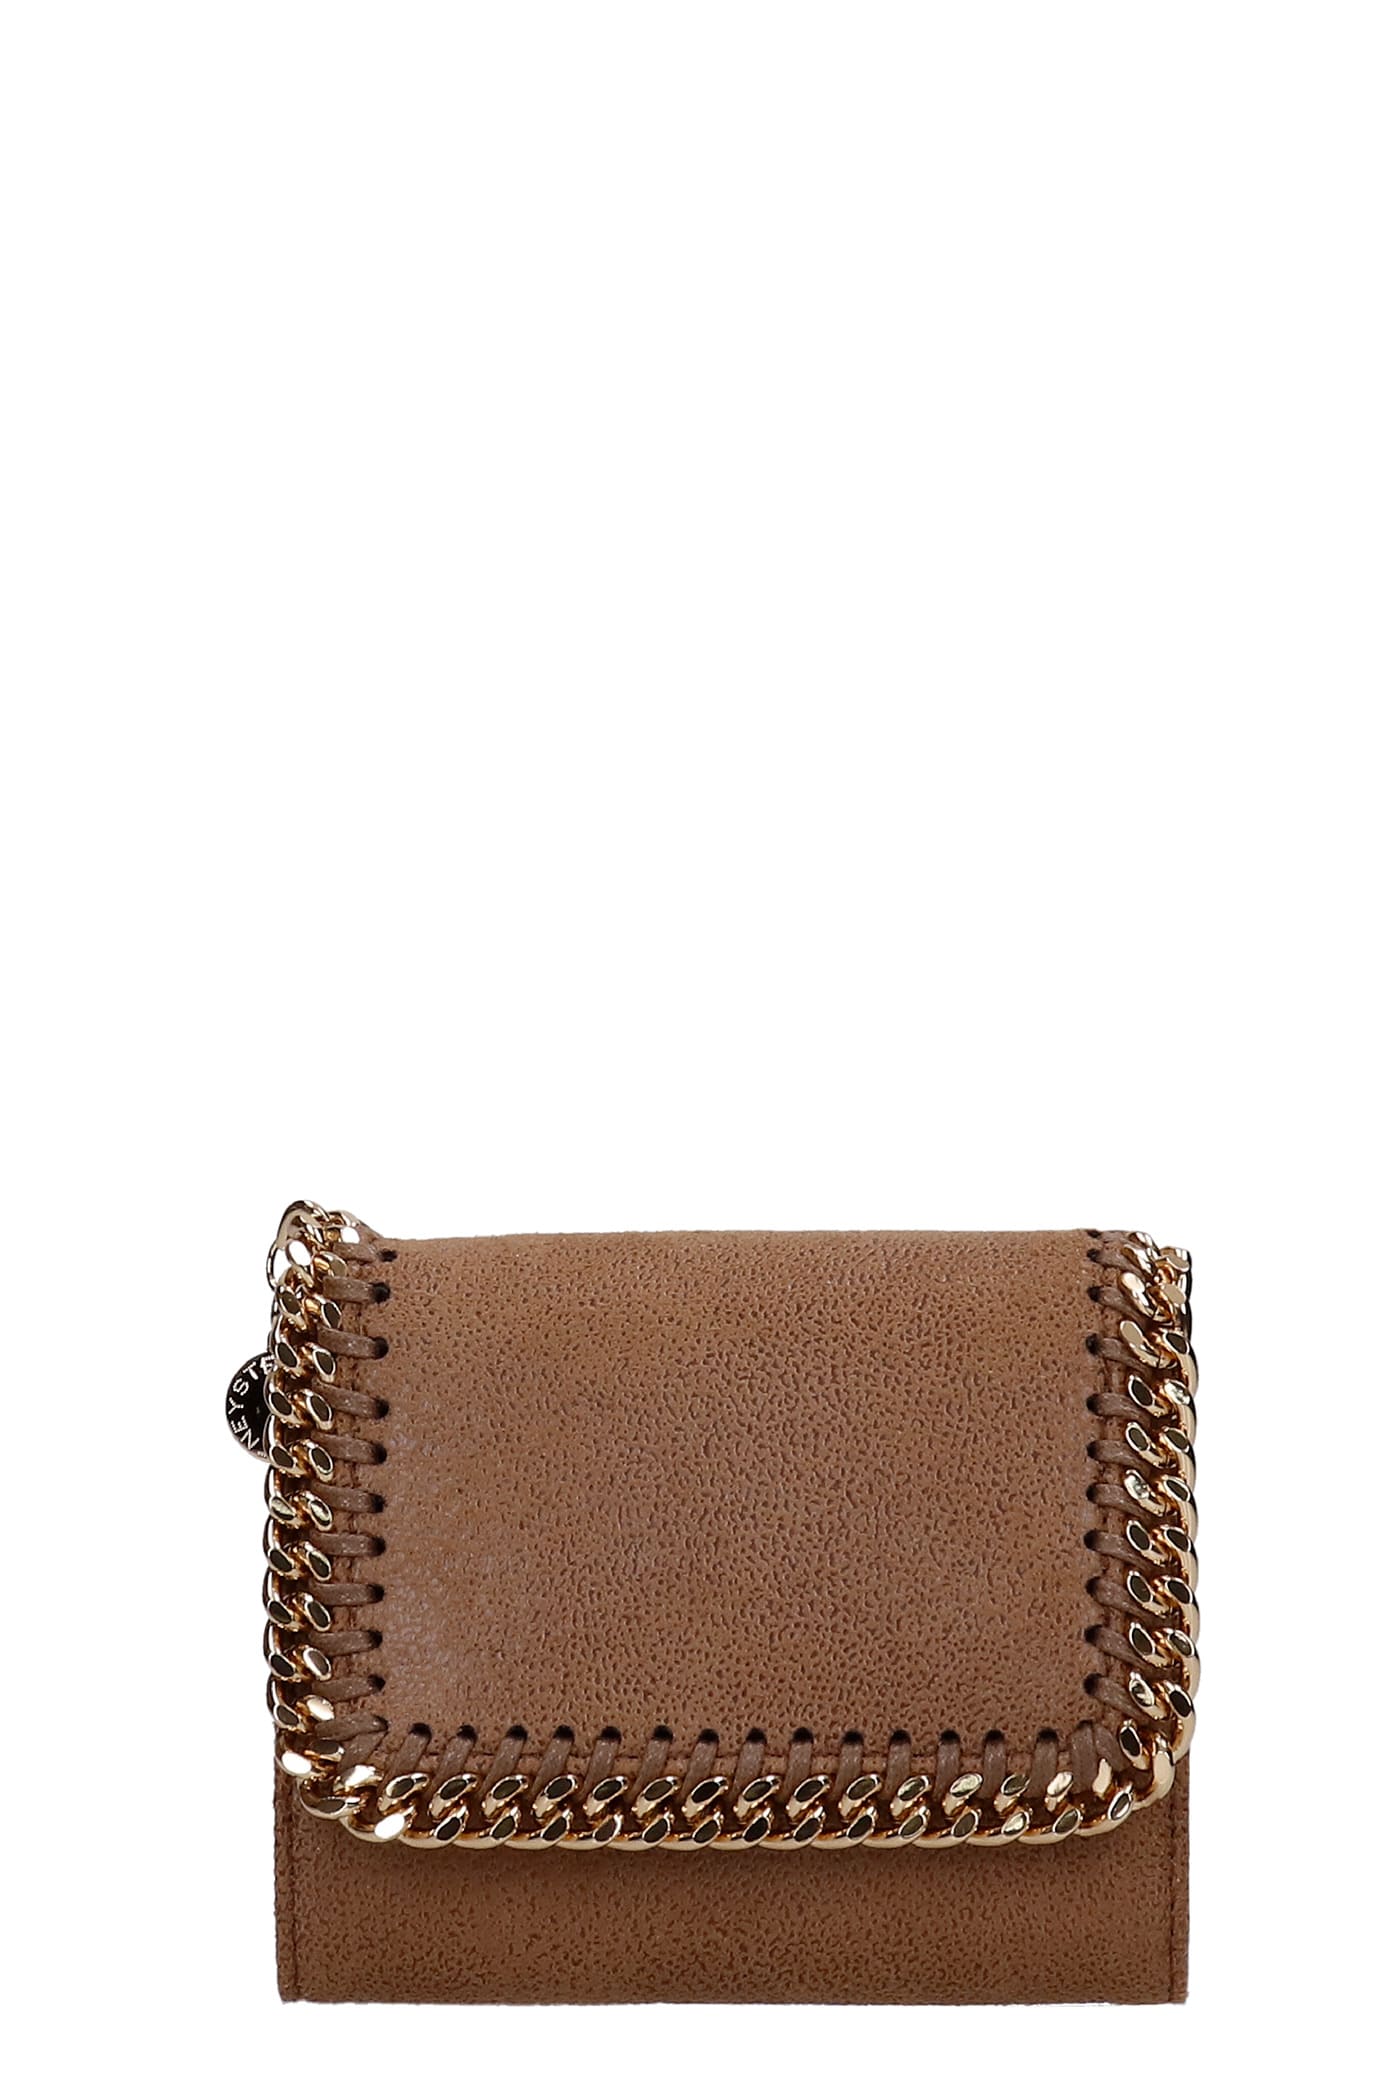 Stella McCartney Falabella Wallet In Leather Color Faux Leather